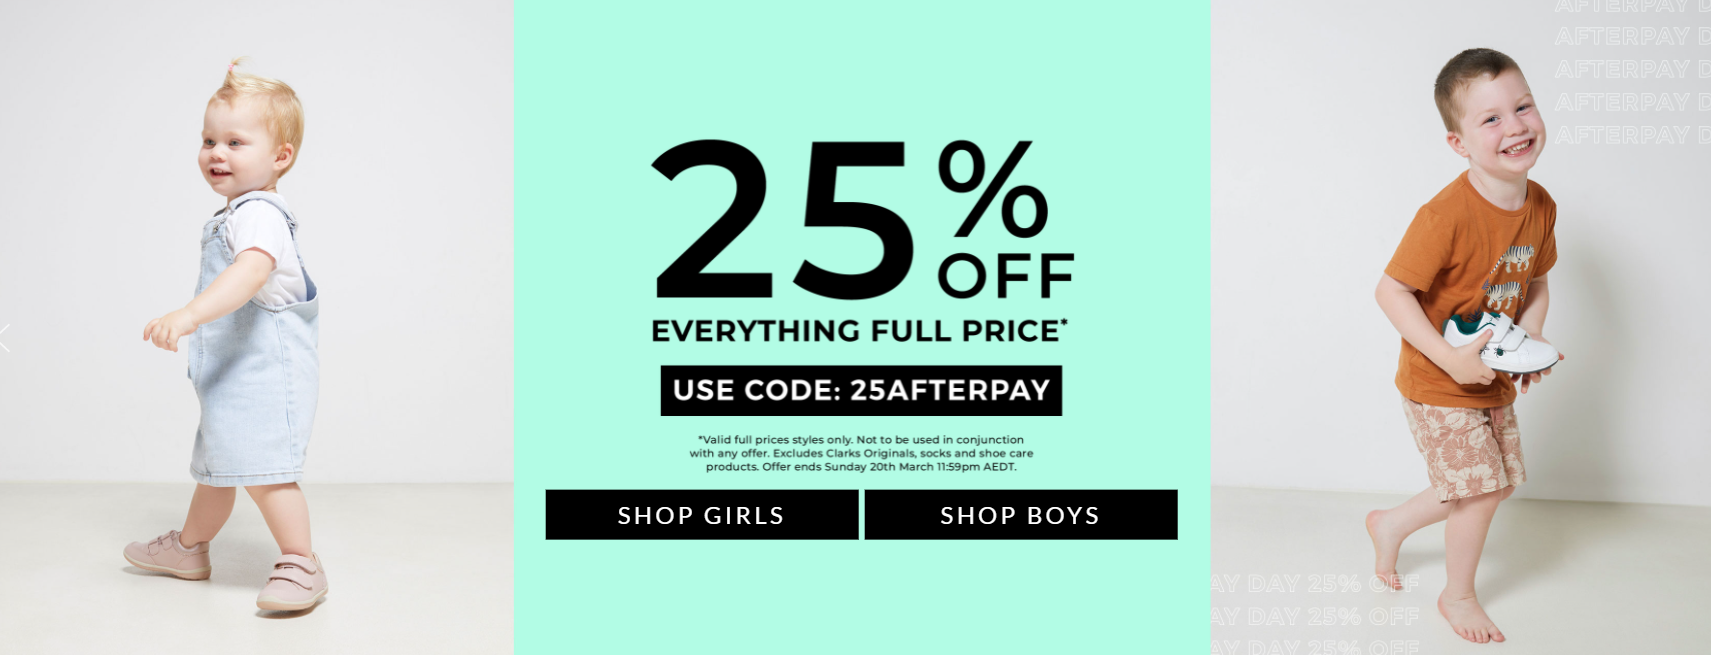 Clarks Afterpay Day sale extra 25% OFF on everything full priced with discount code